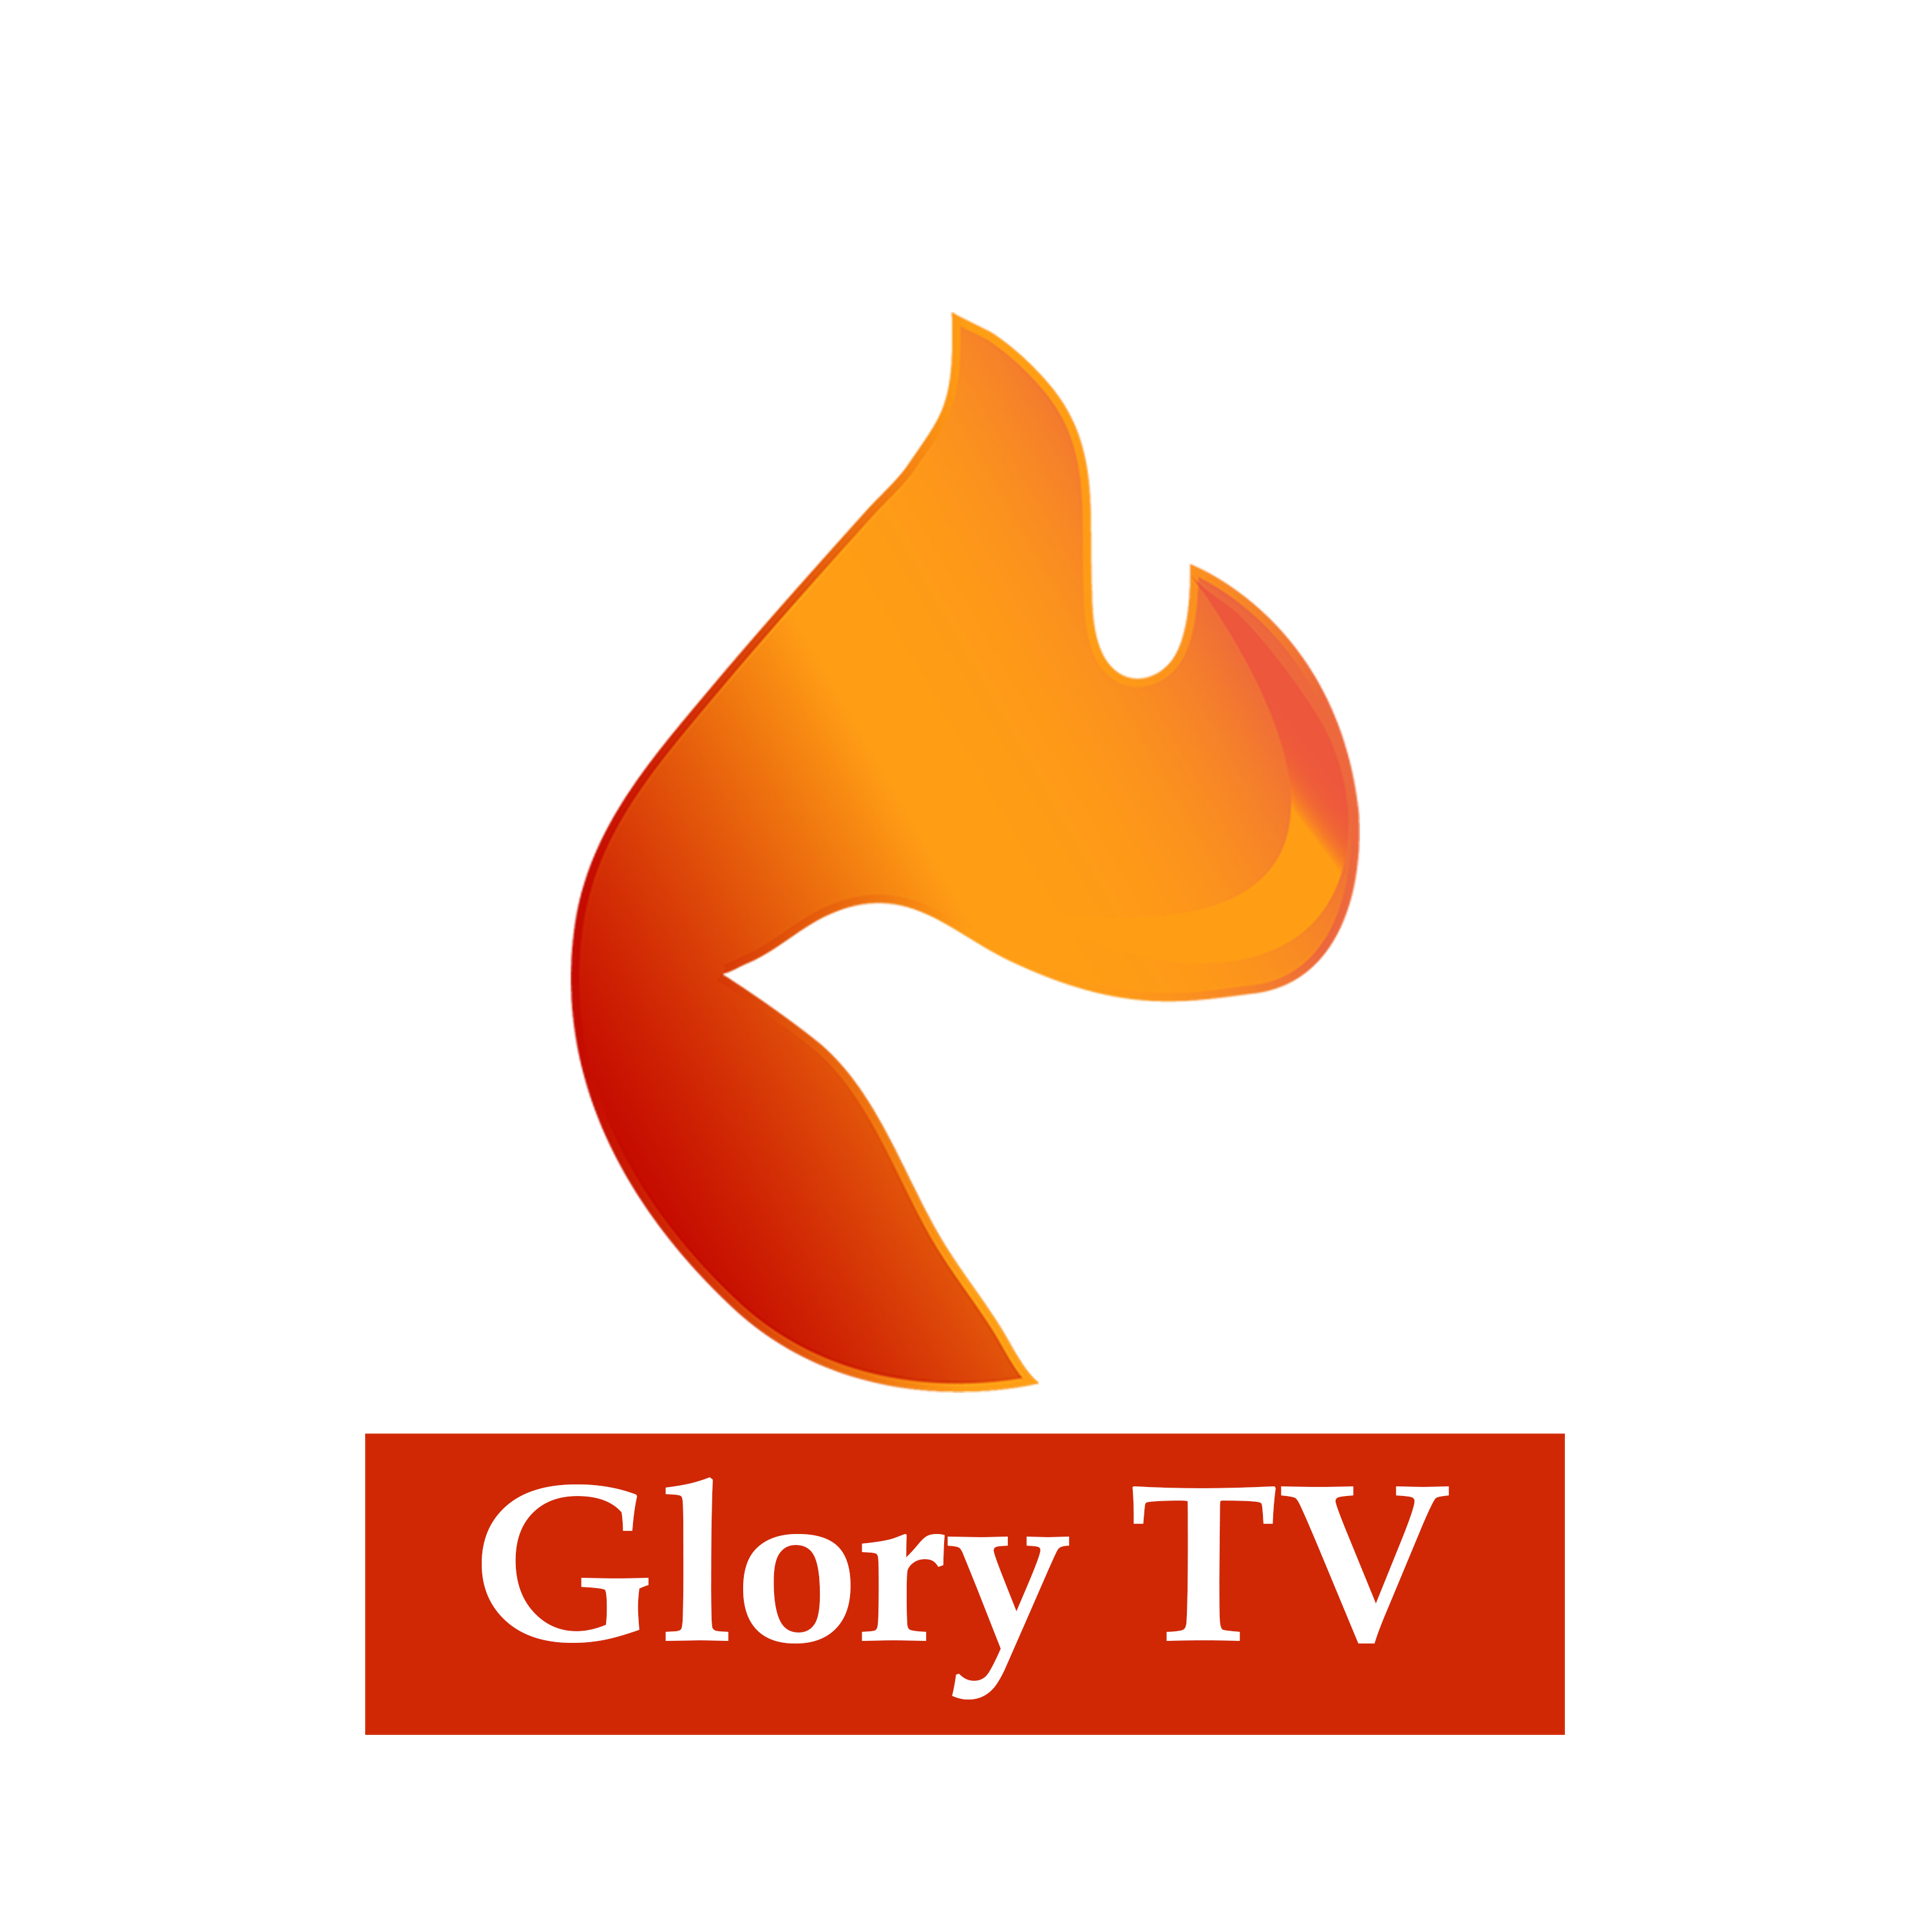 GLORY TV is a modern, multilingual, Christ- centered television channel